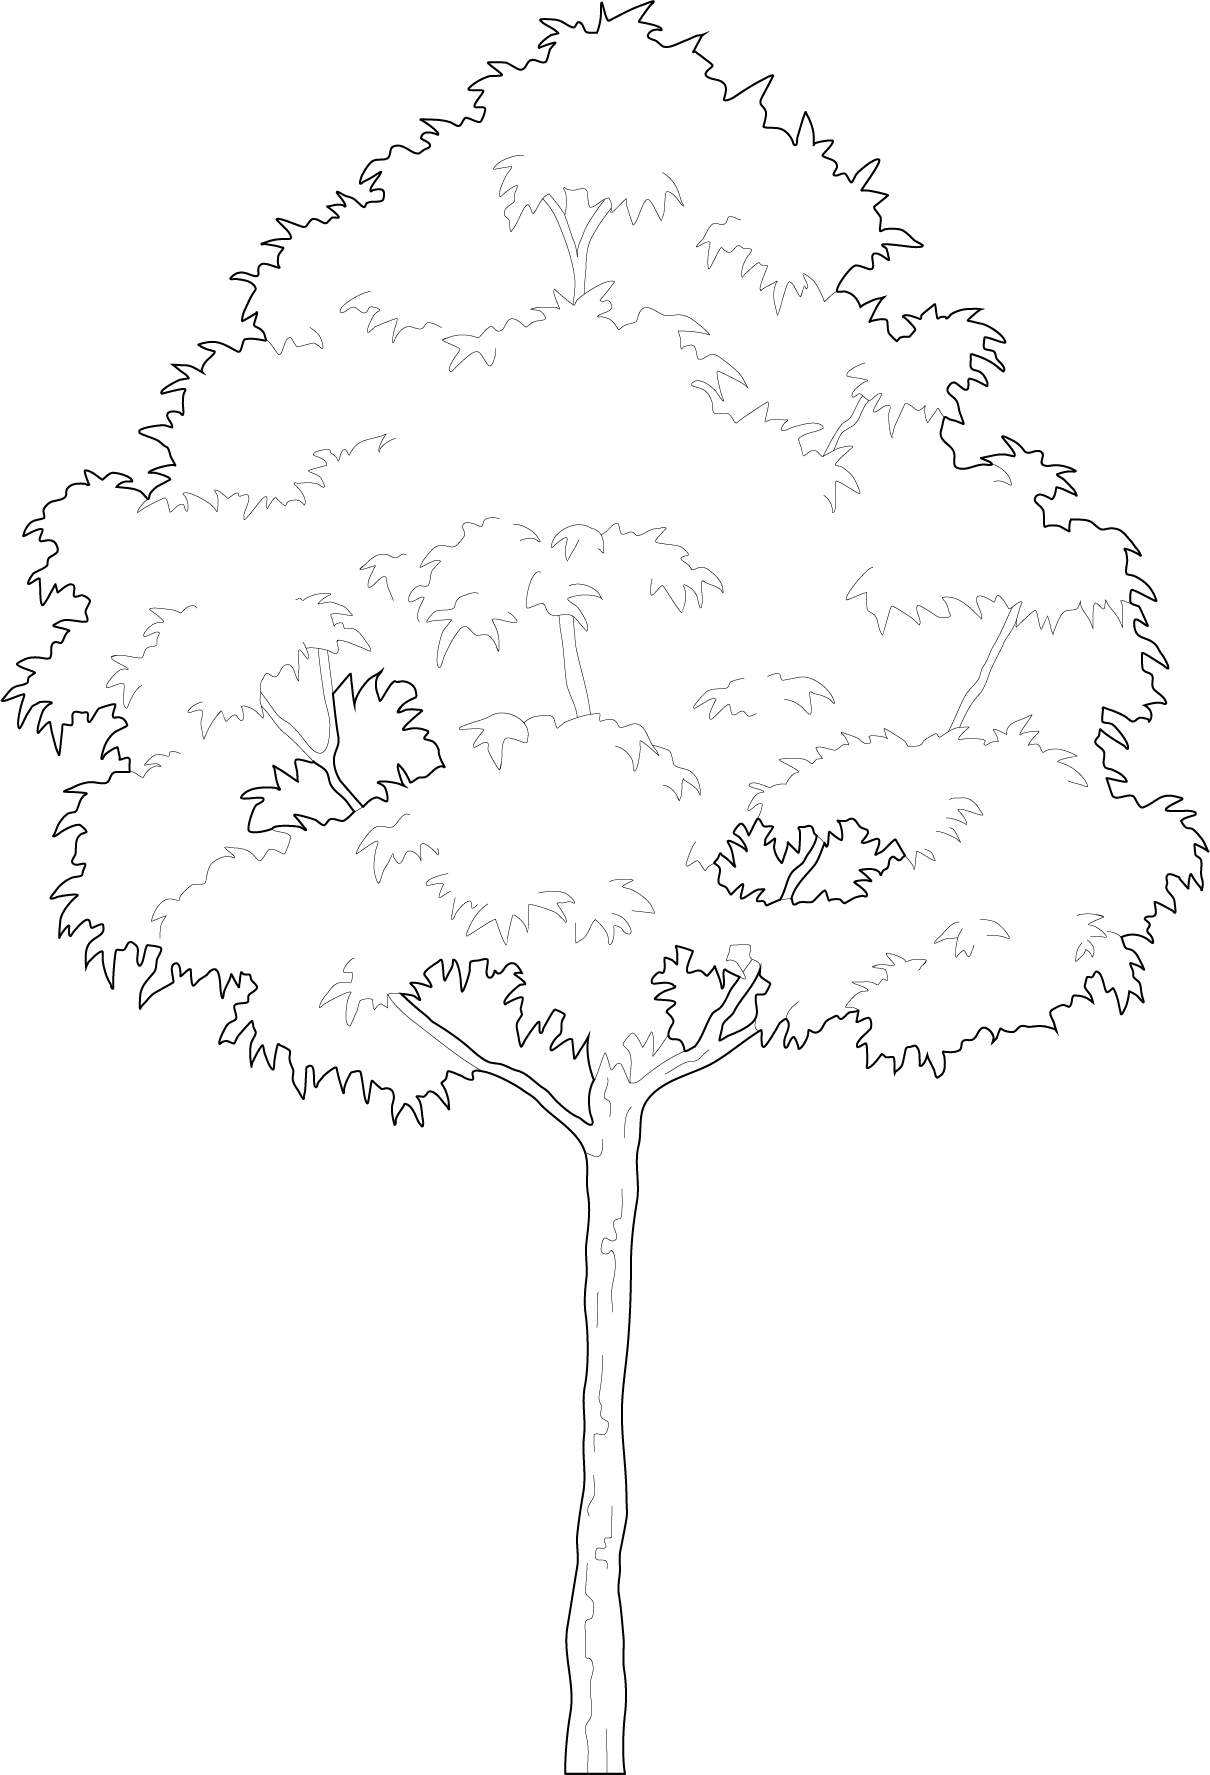 A round small tree 2d trees